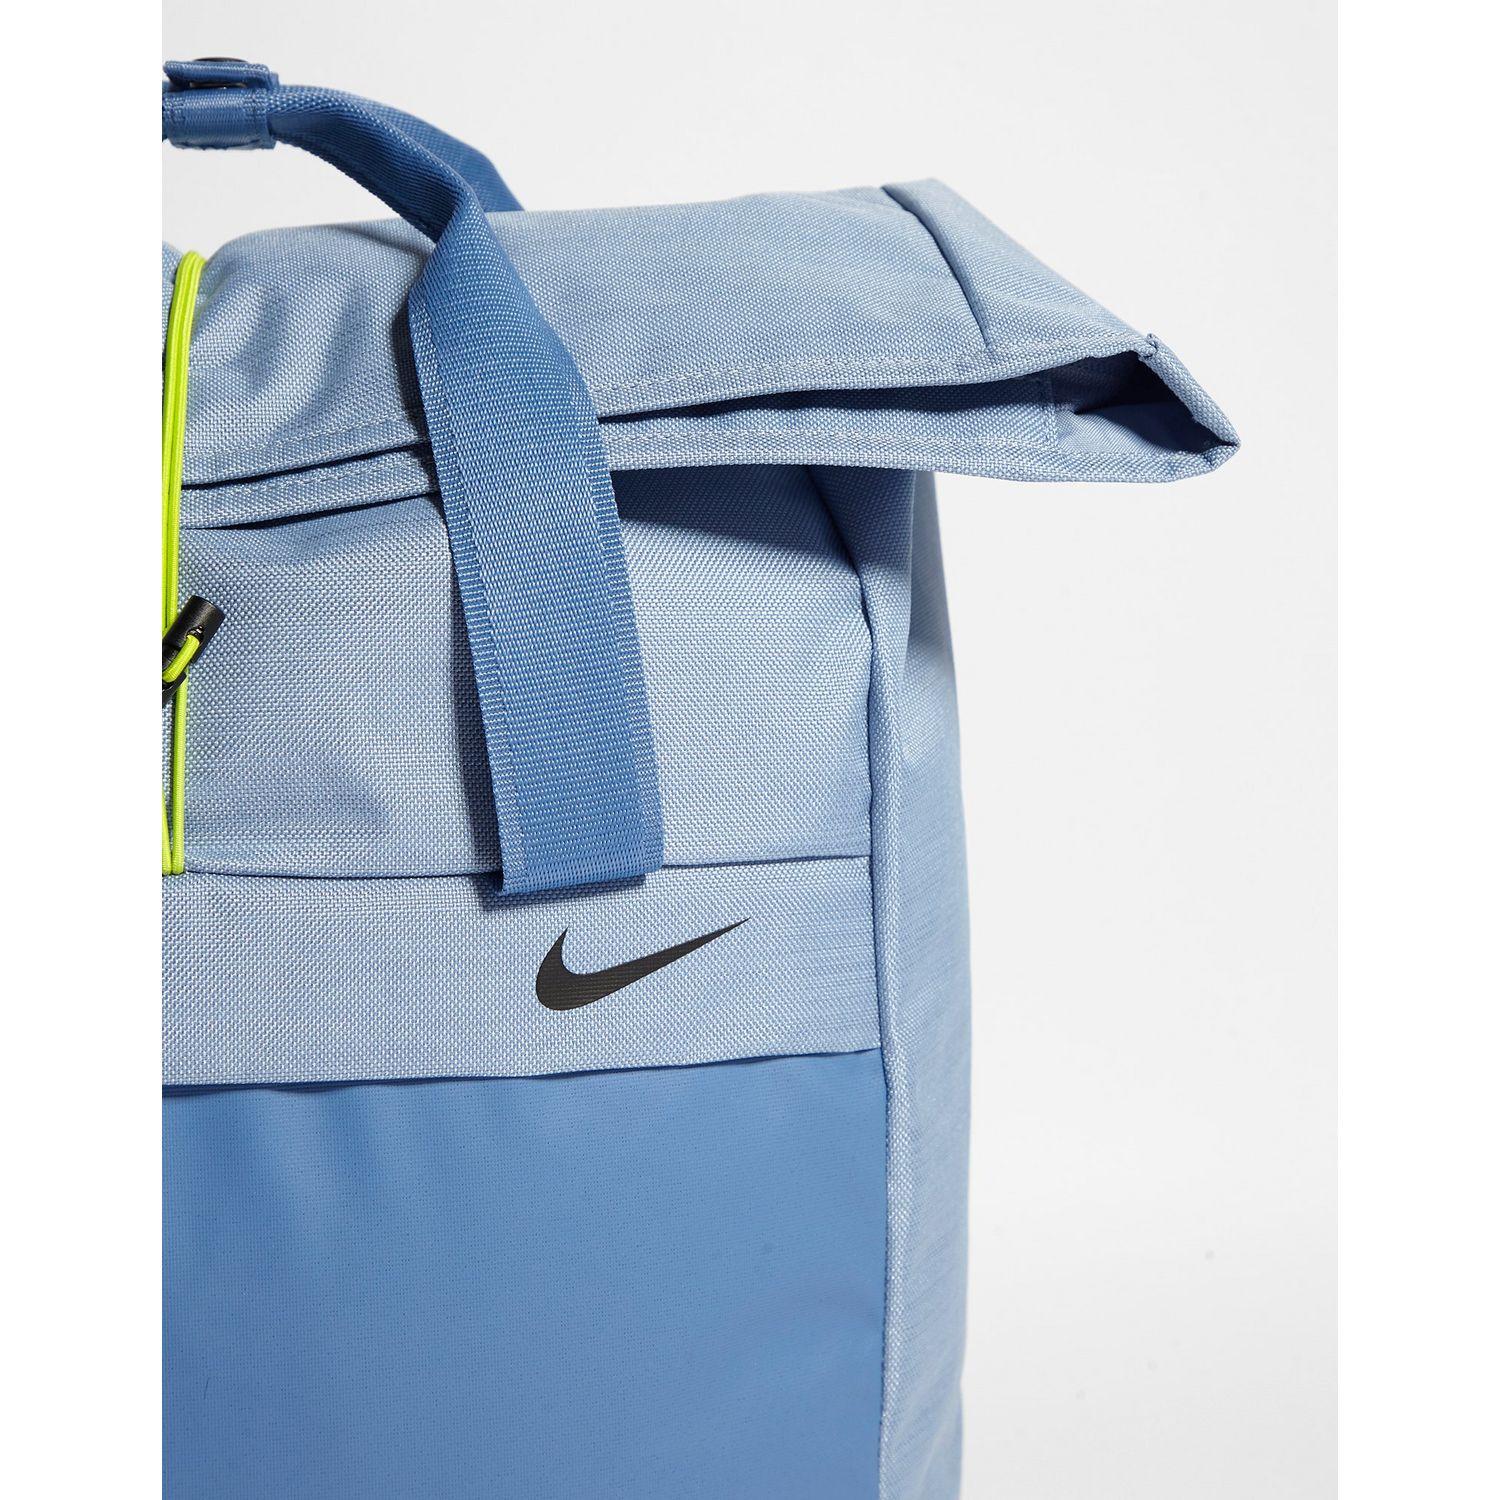 Nike Synthetic Radiate Backpack in Blue/Pink (Blue) - Lyst